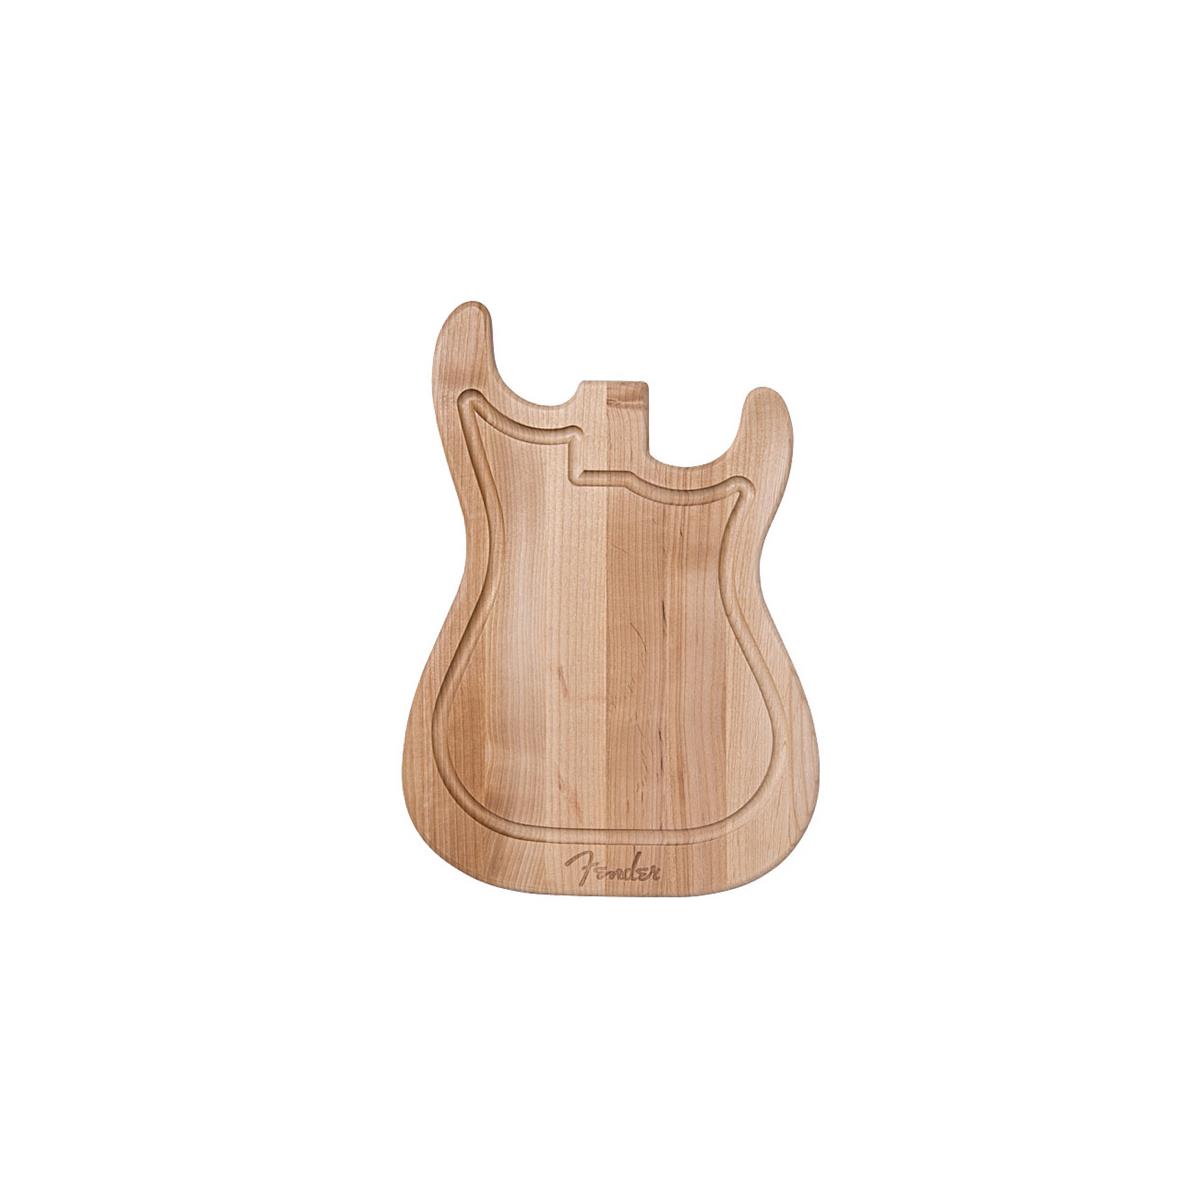 Image of Fender Stratocaster Guitar Cutting Board